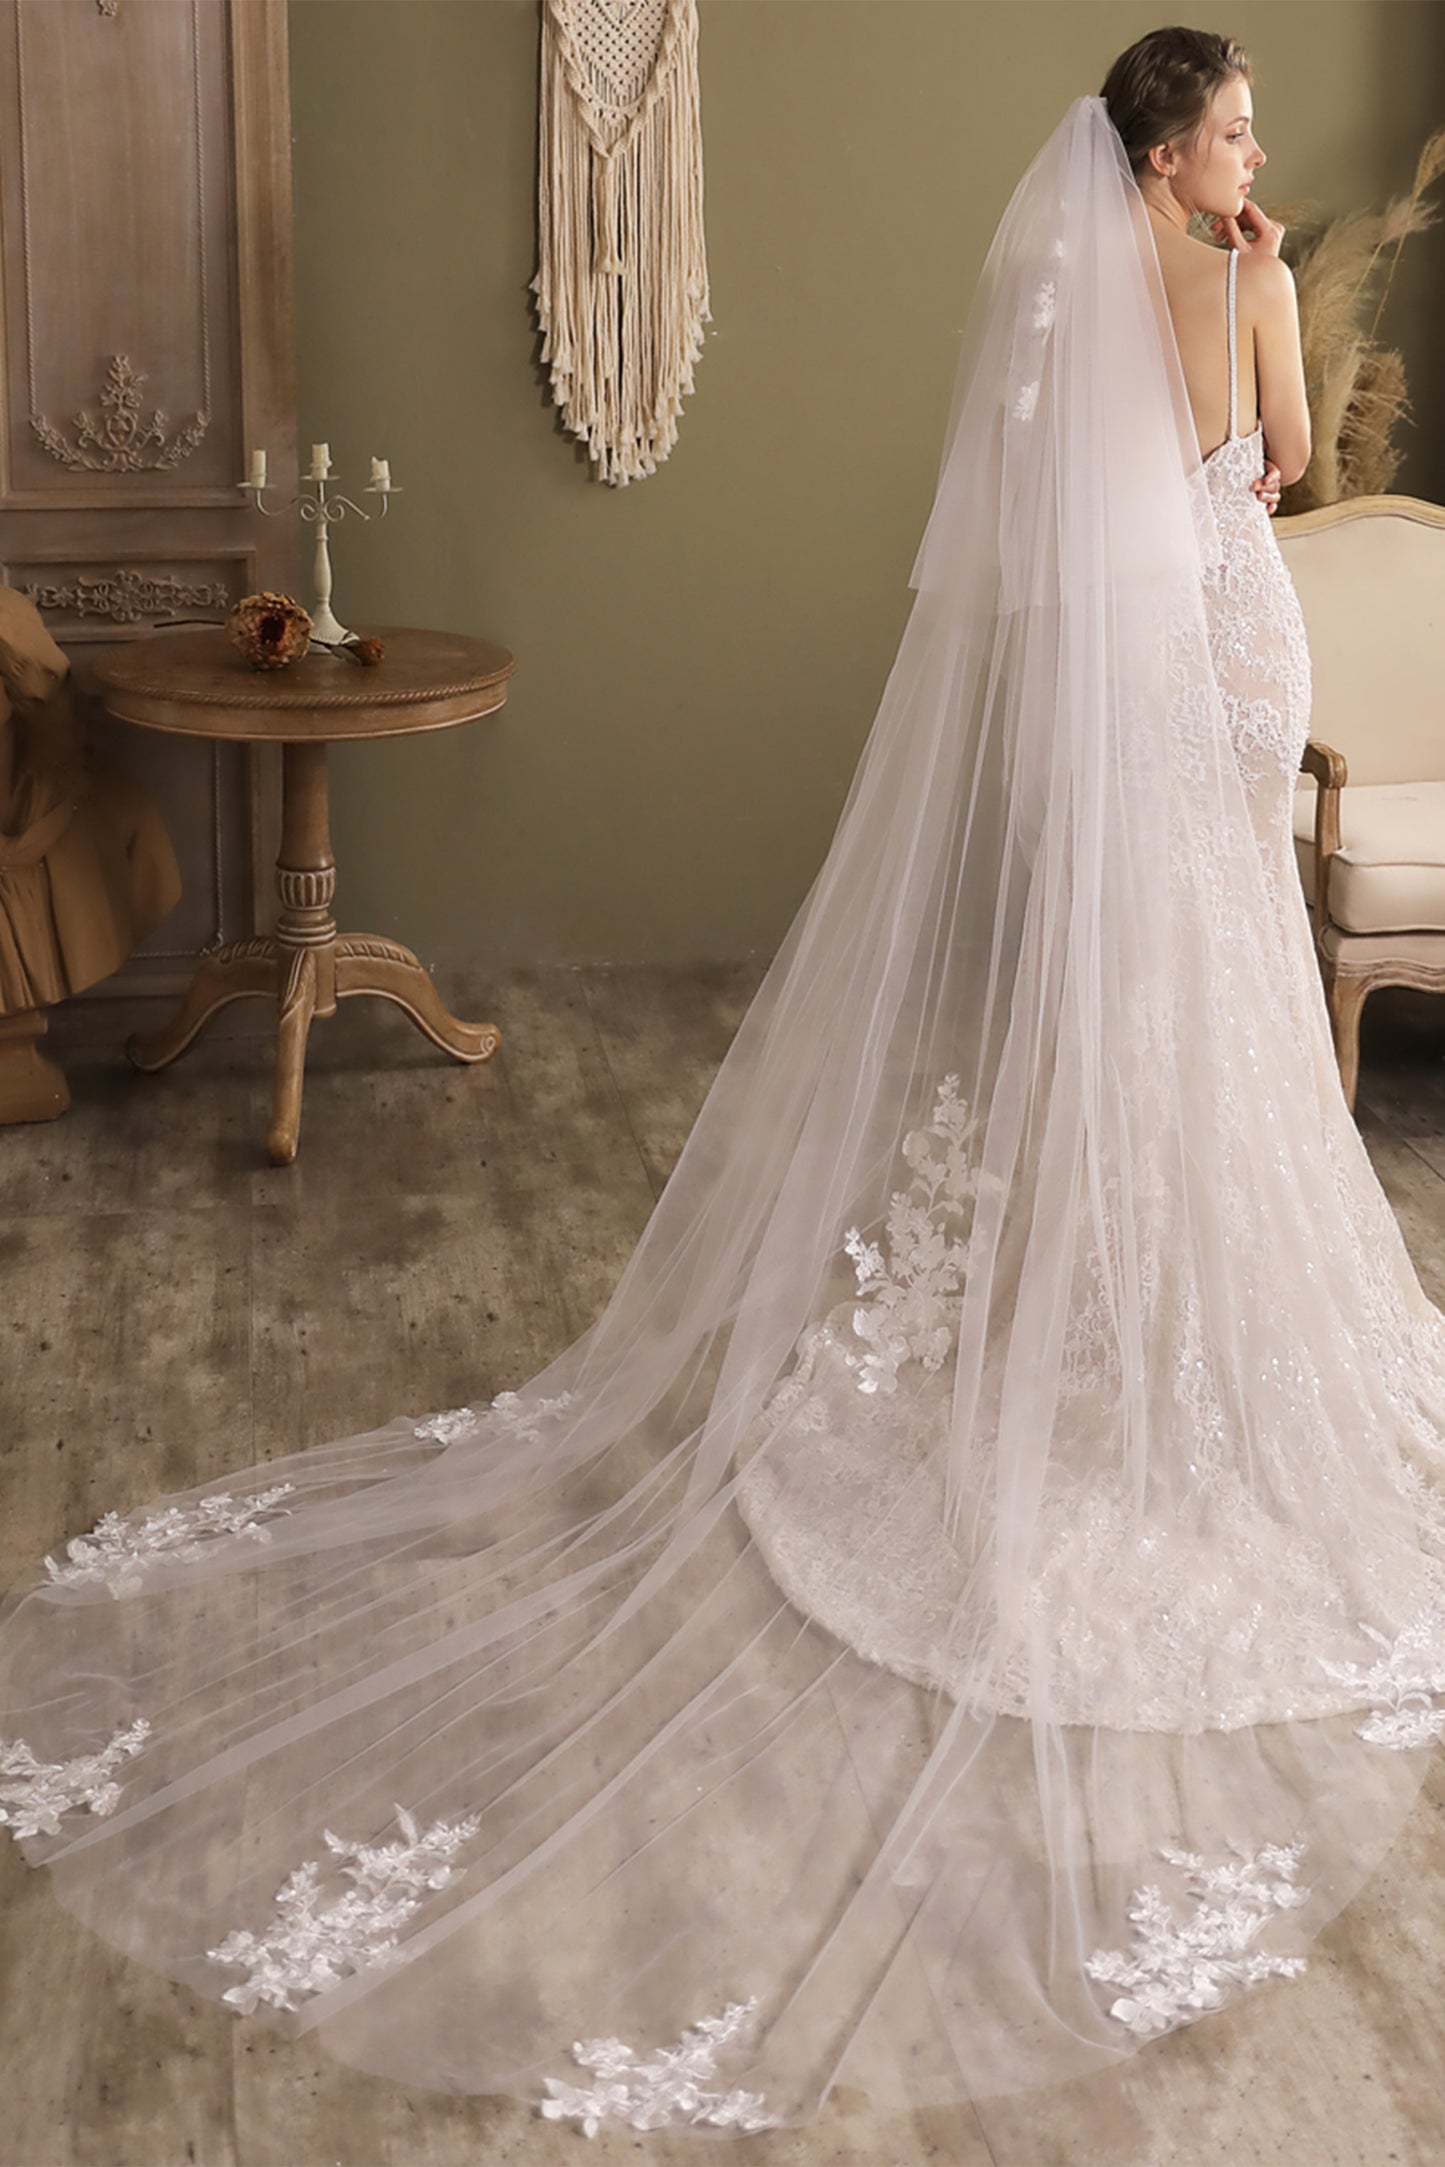 Two-tier Cut Edge Tulle Chapel Veils with Appliques CV0267